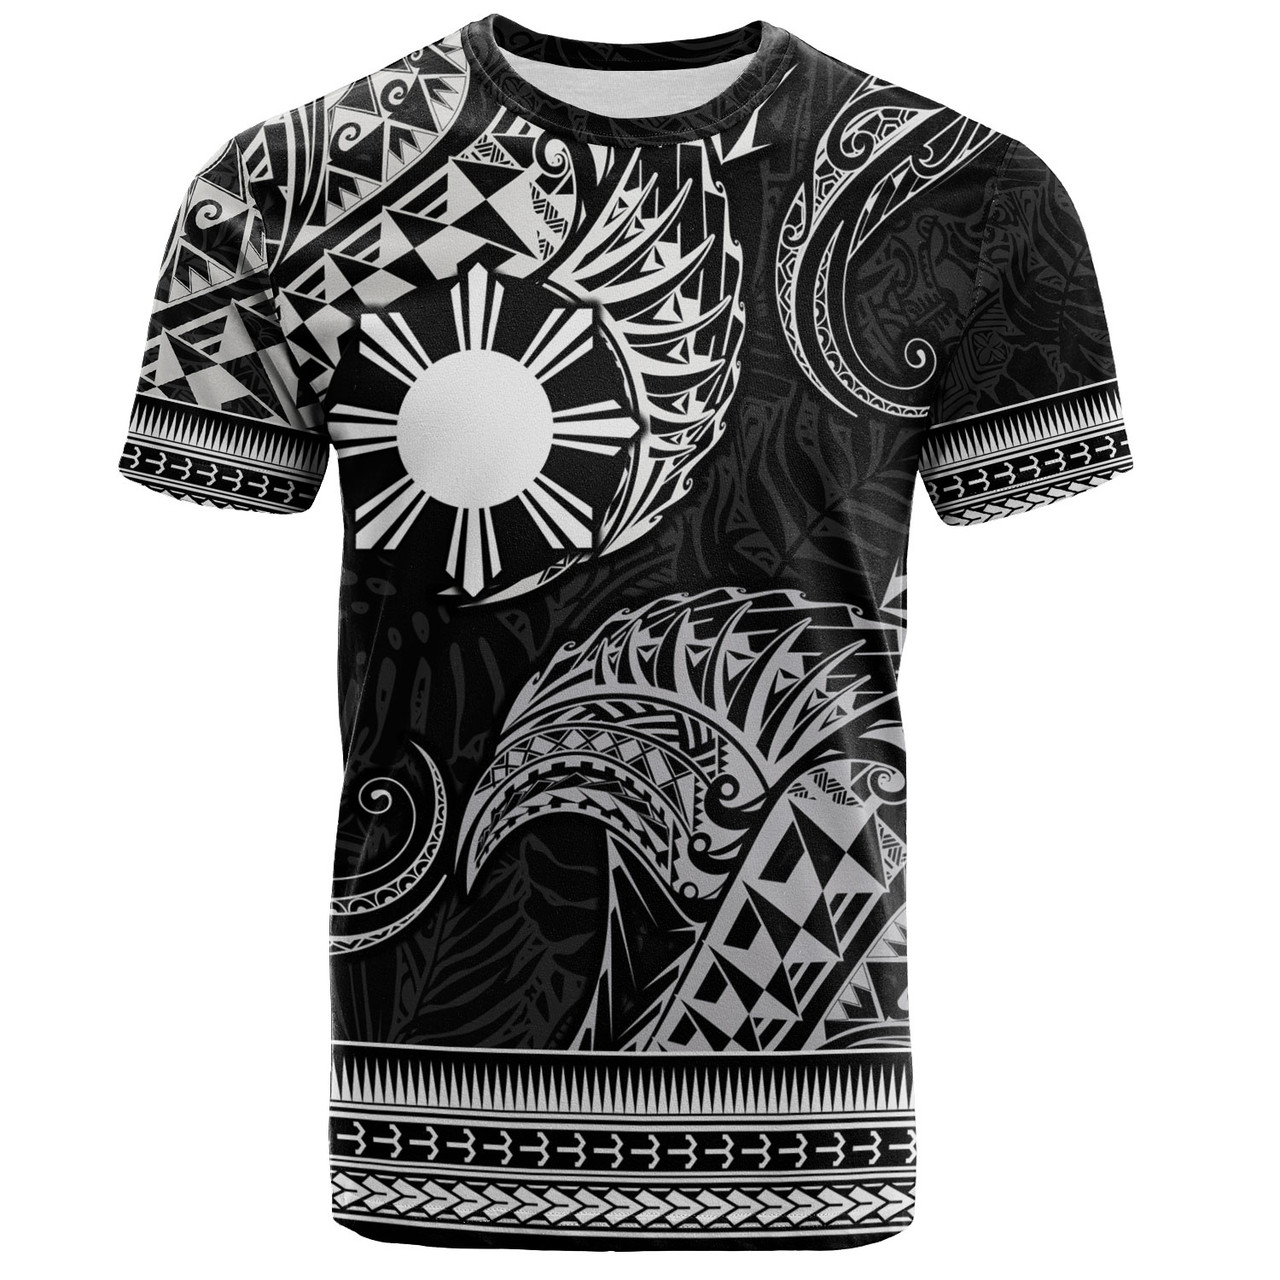 Philippines Filipinos T-Shirt Filipino Coat Of Arms With Leaves and Tribal Patterns